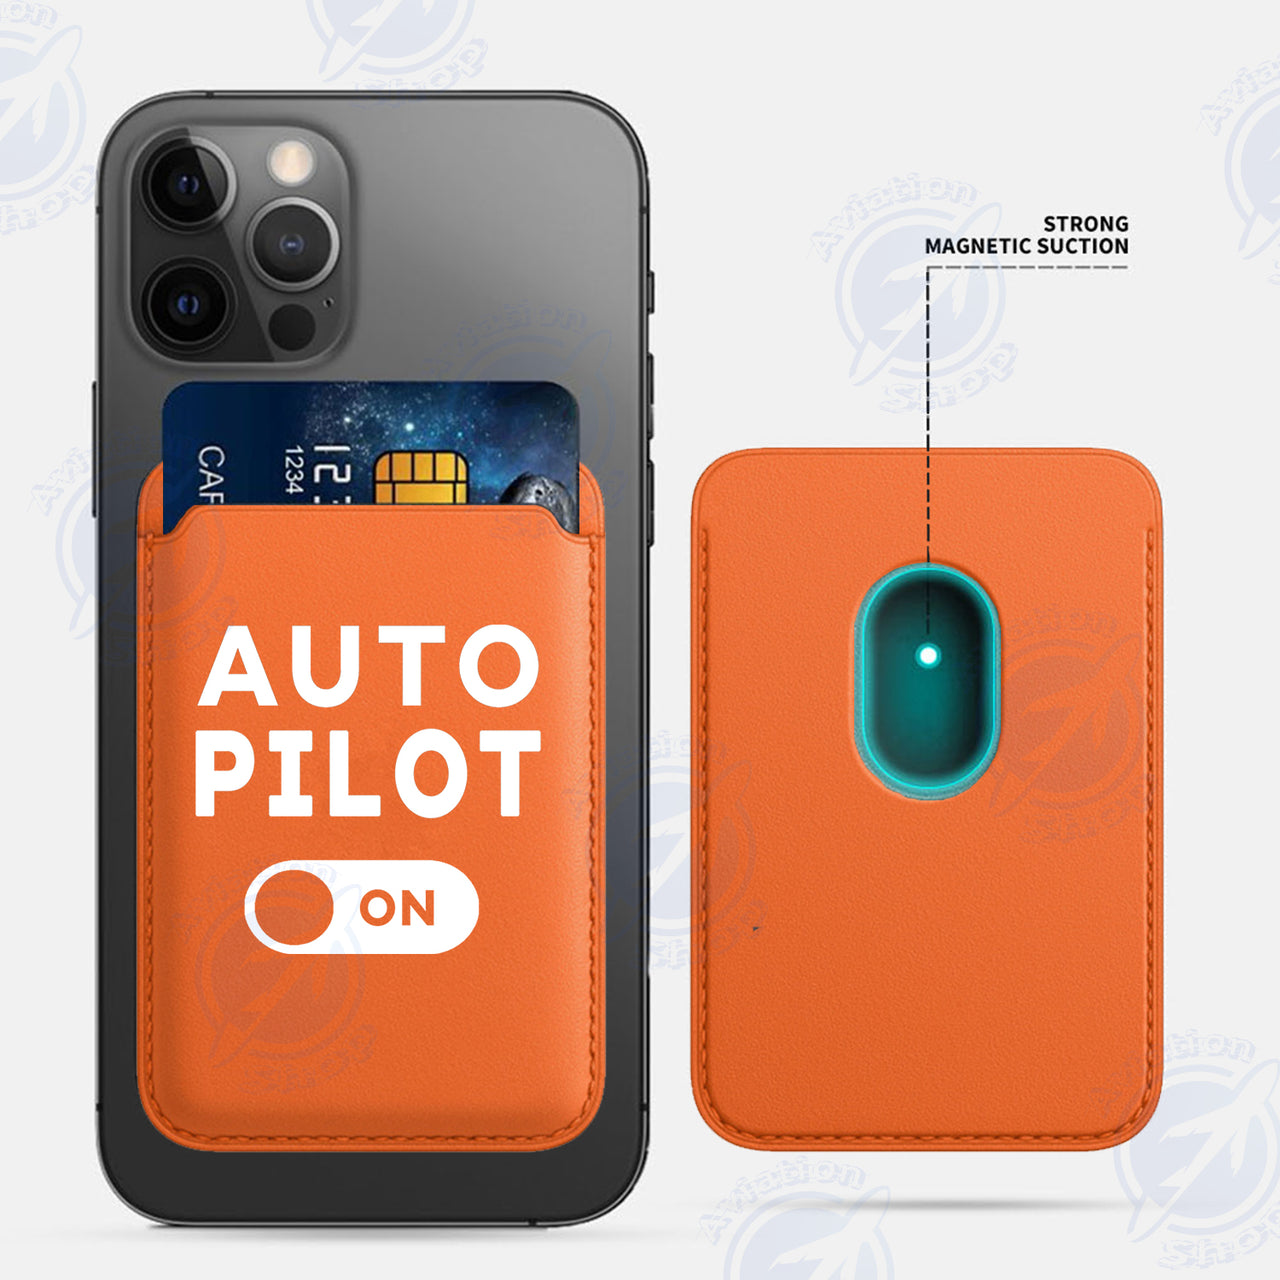 Auto Pilot ON iPhone Cases Magnetic Card Wallet